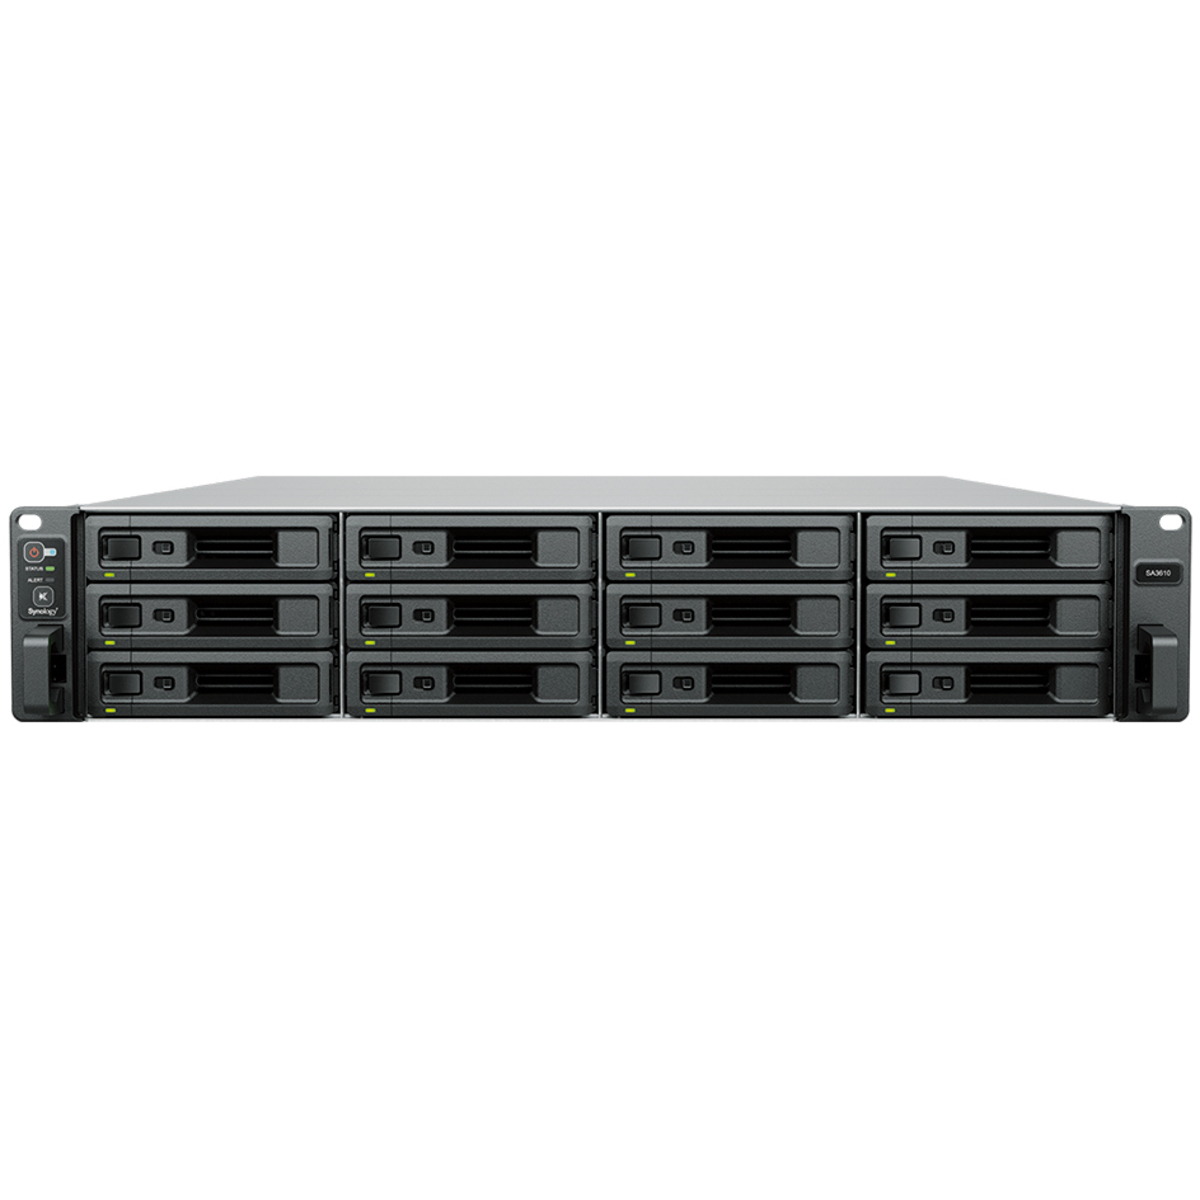 Synology RackStation SA3410 22tb 12-Bay RackMount Large Business / Enterprise NAS - Network Attached Storage Device 11x2tb Seagate IronWolf Pro ST2000NT001 3.5 7200rpm SATA 6Gb/s HDD NAS Class Drives Installed - Burn-In Tested RackStation SA3410